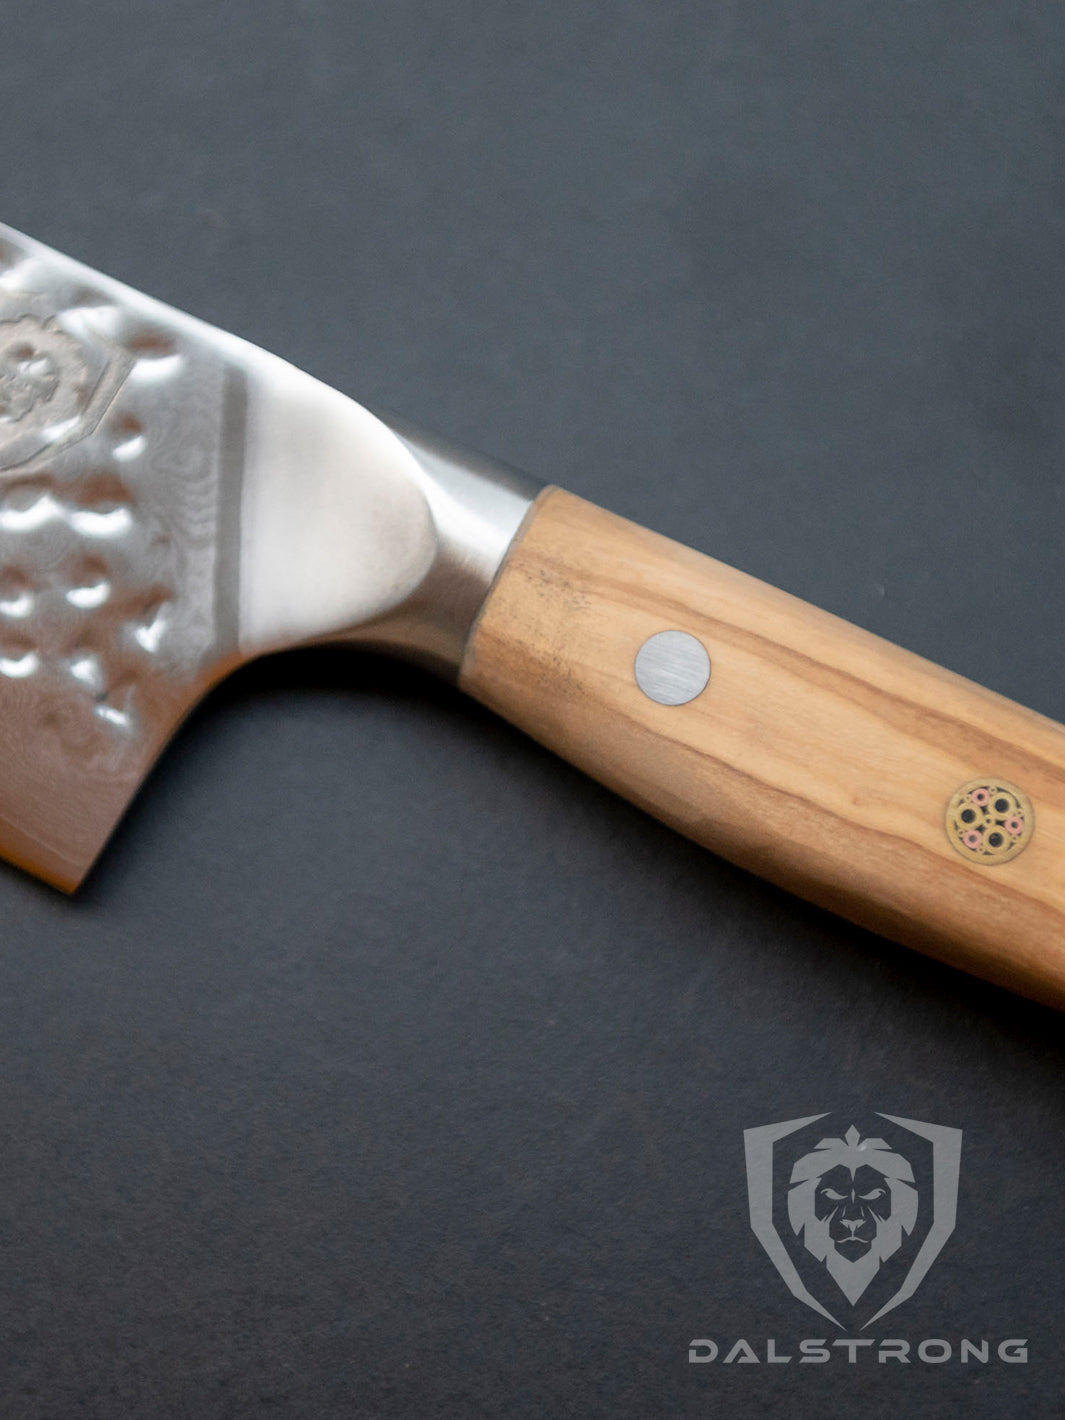 Dalstrong shogun series 8 inch chef knife with olive wooden handle on a rough surface.